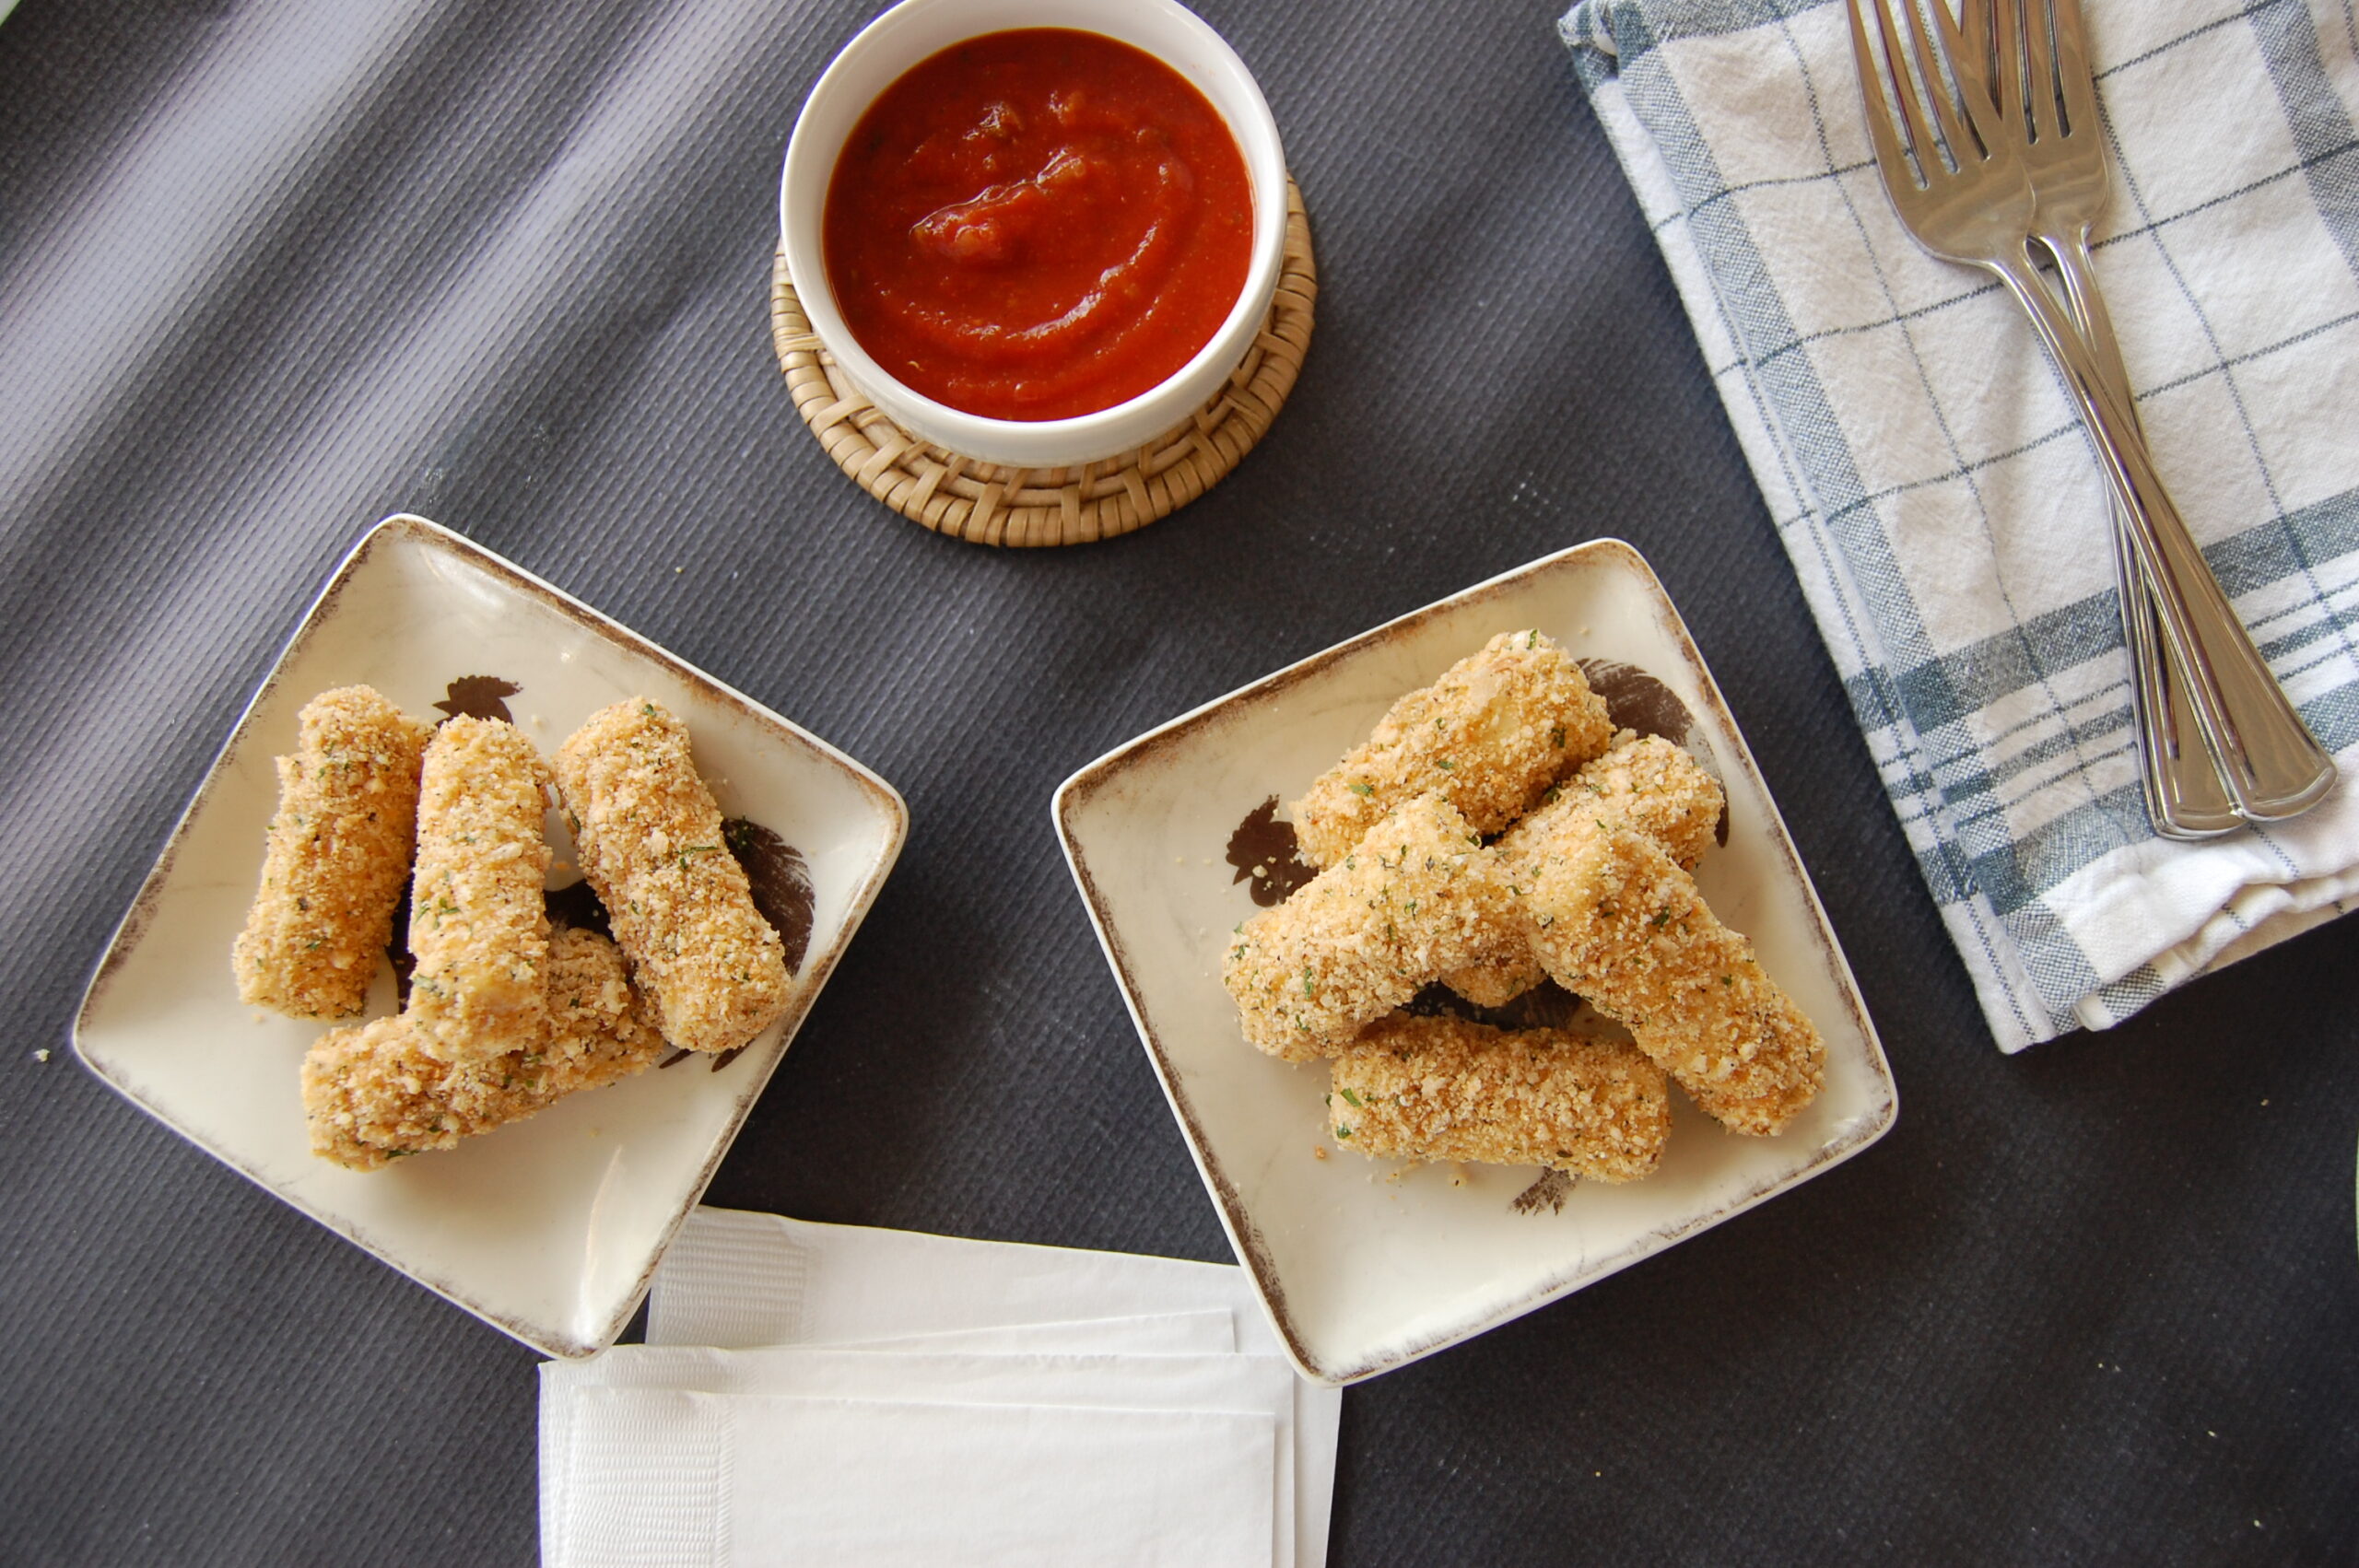 Two plates with mozzarella sticks piled on it with a jar of marinara sauce and a napkin with 2 forks on it.